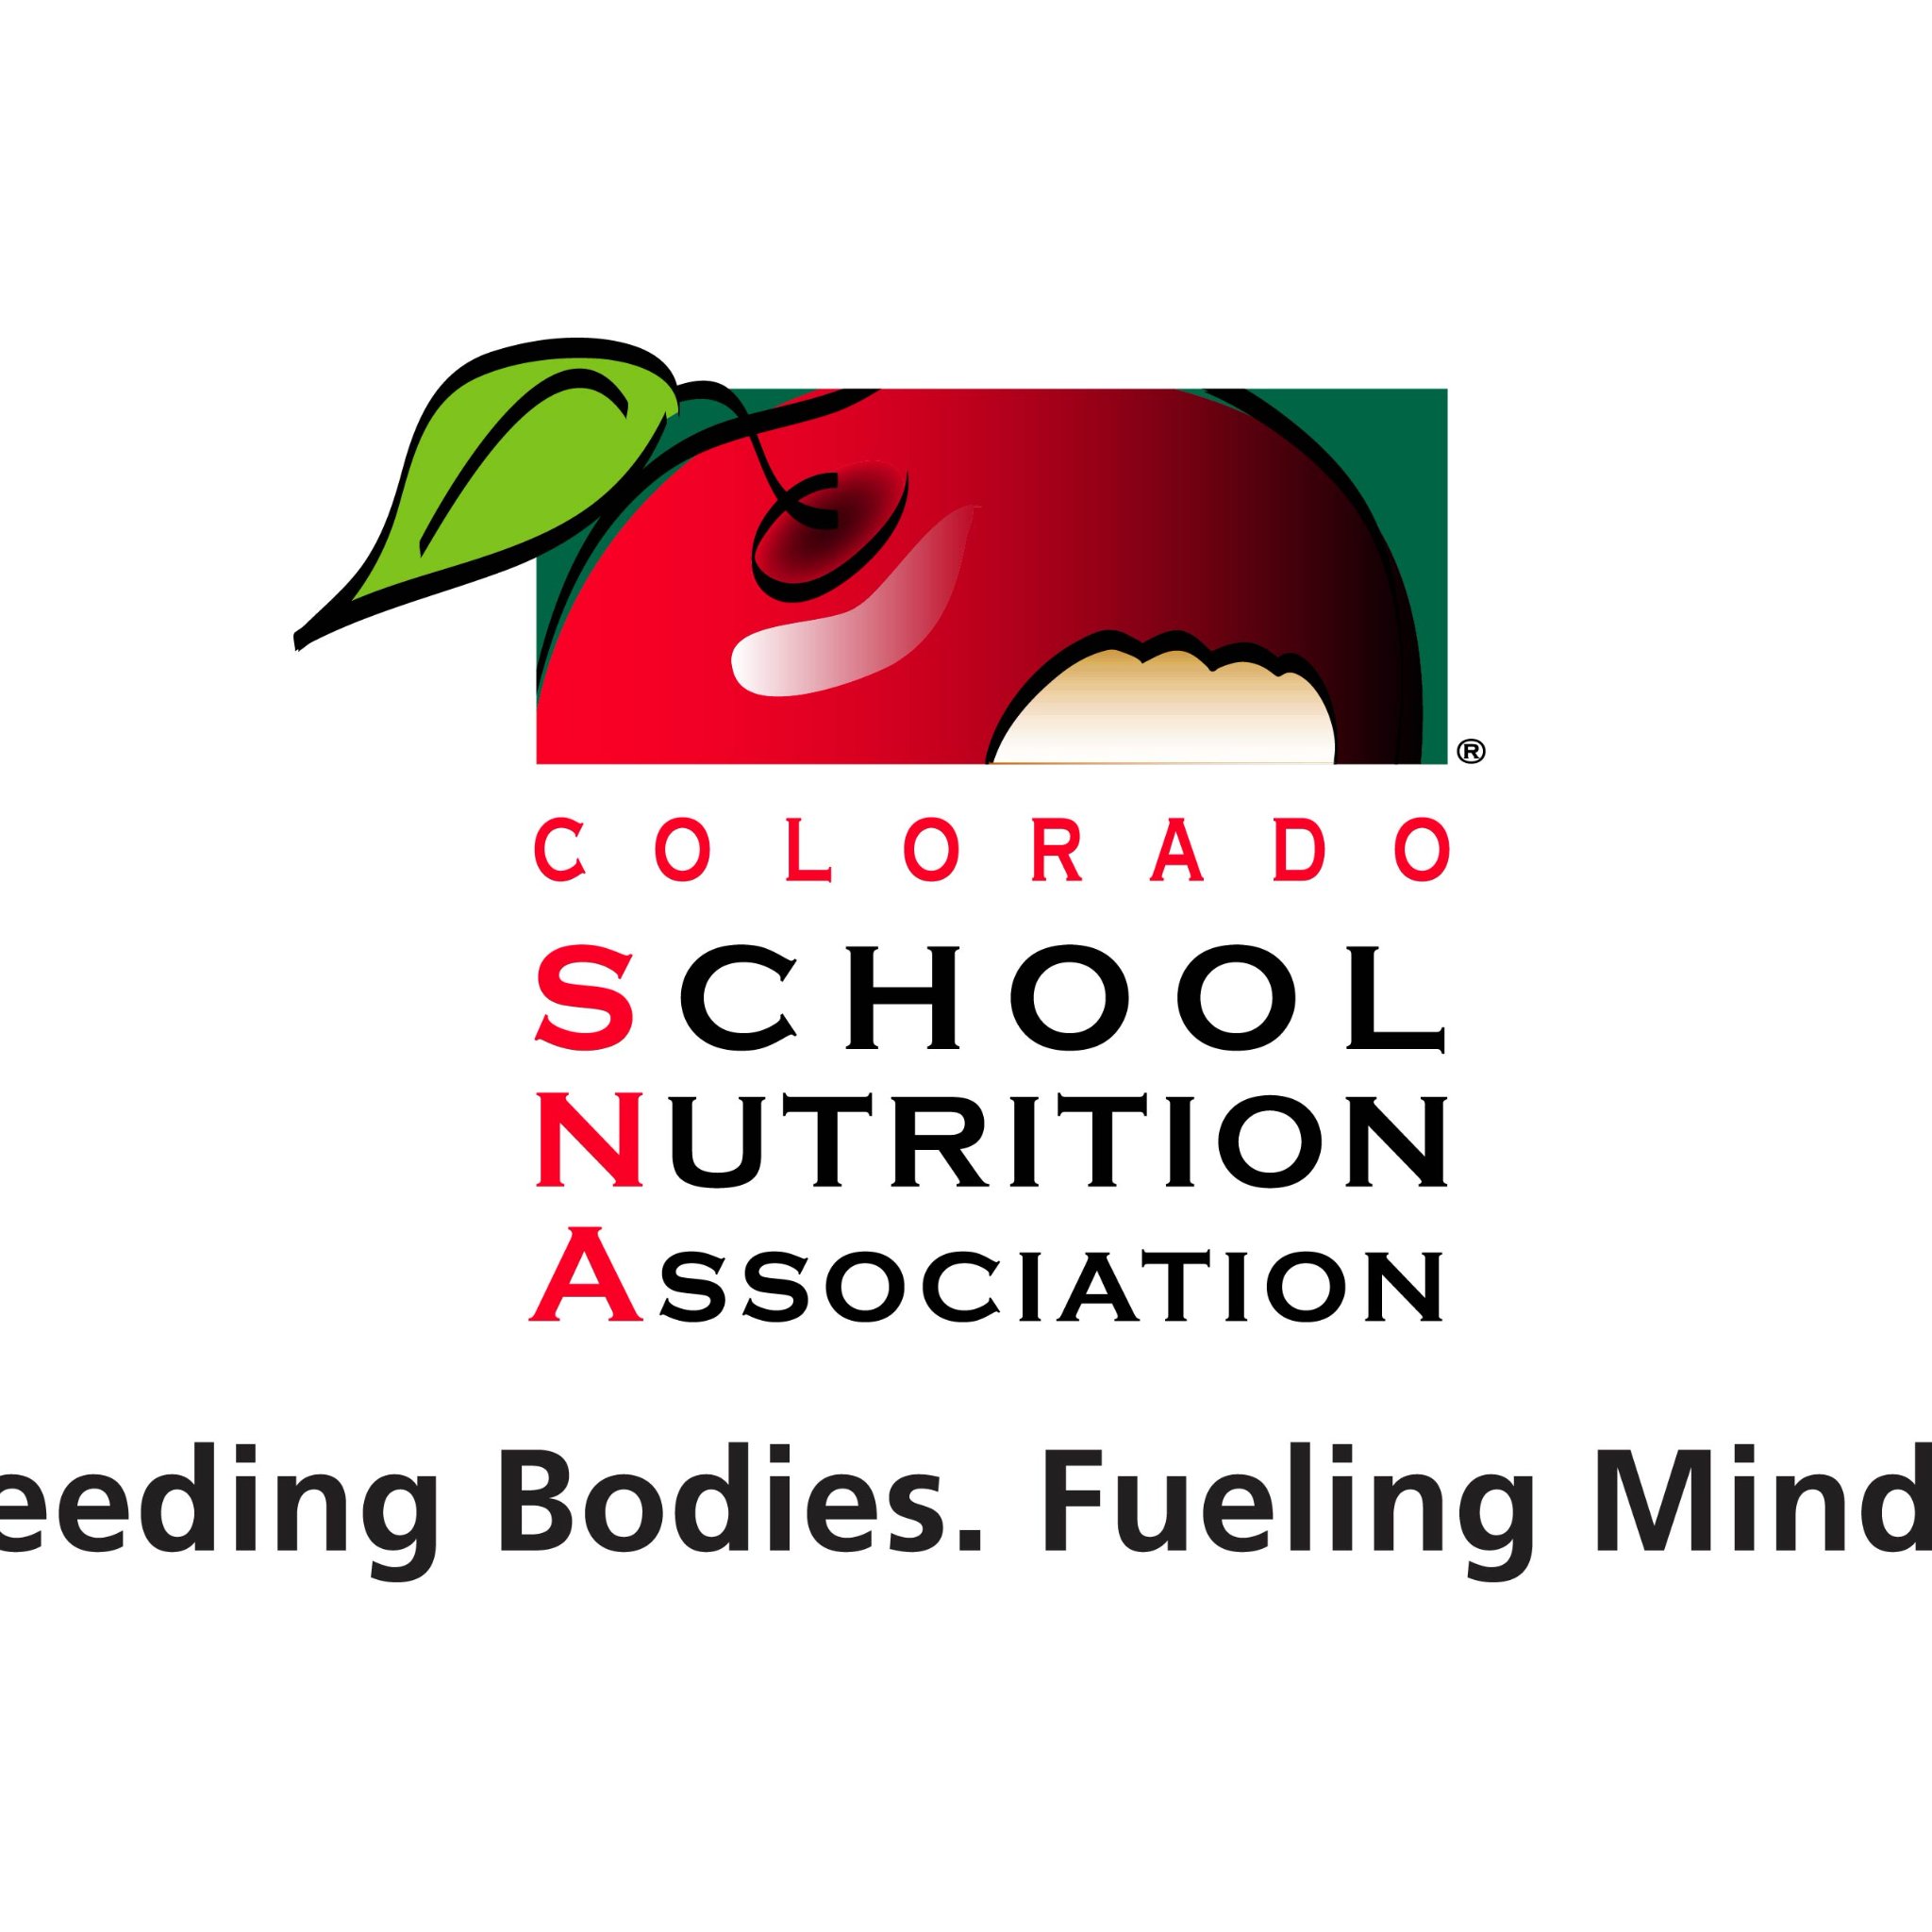 The Colorado School Nutrition Association (CSNA) is dedicated to being the recognized experts who advocate the link between nutrition, health and education.